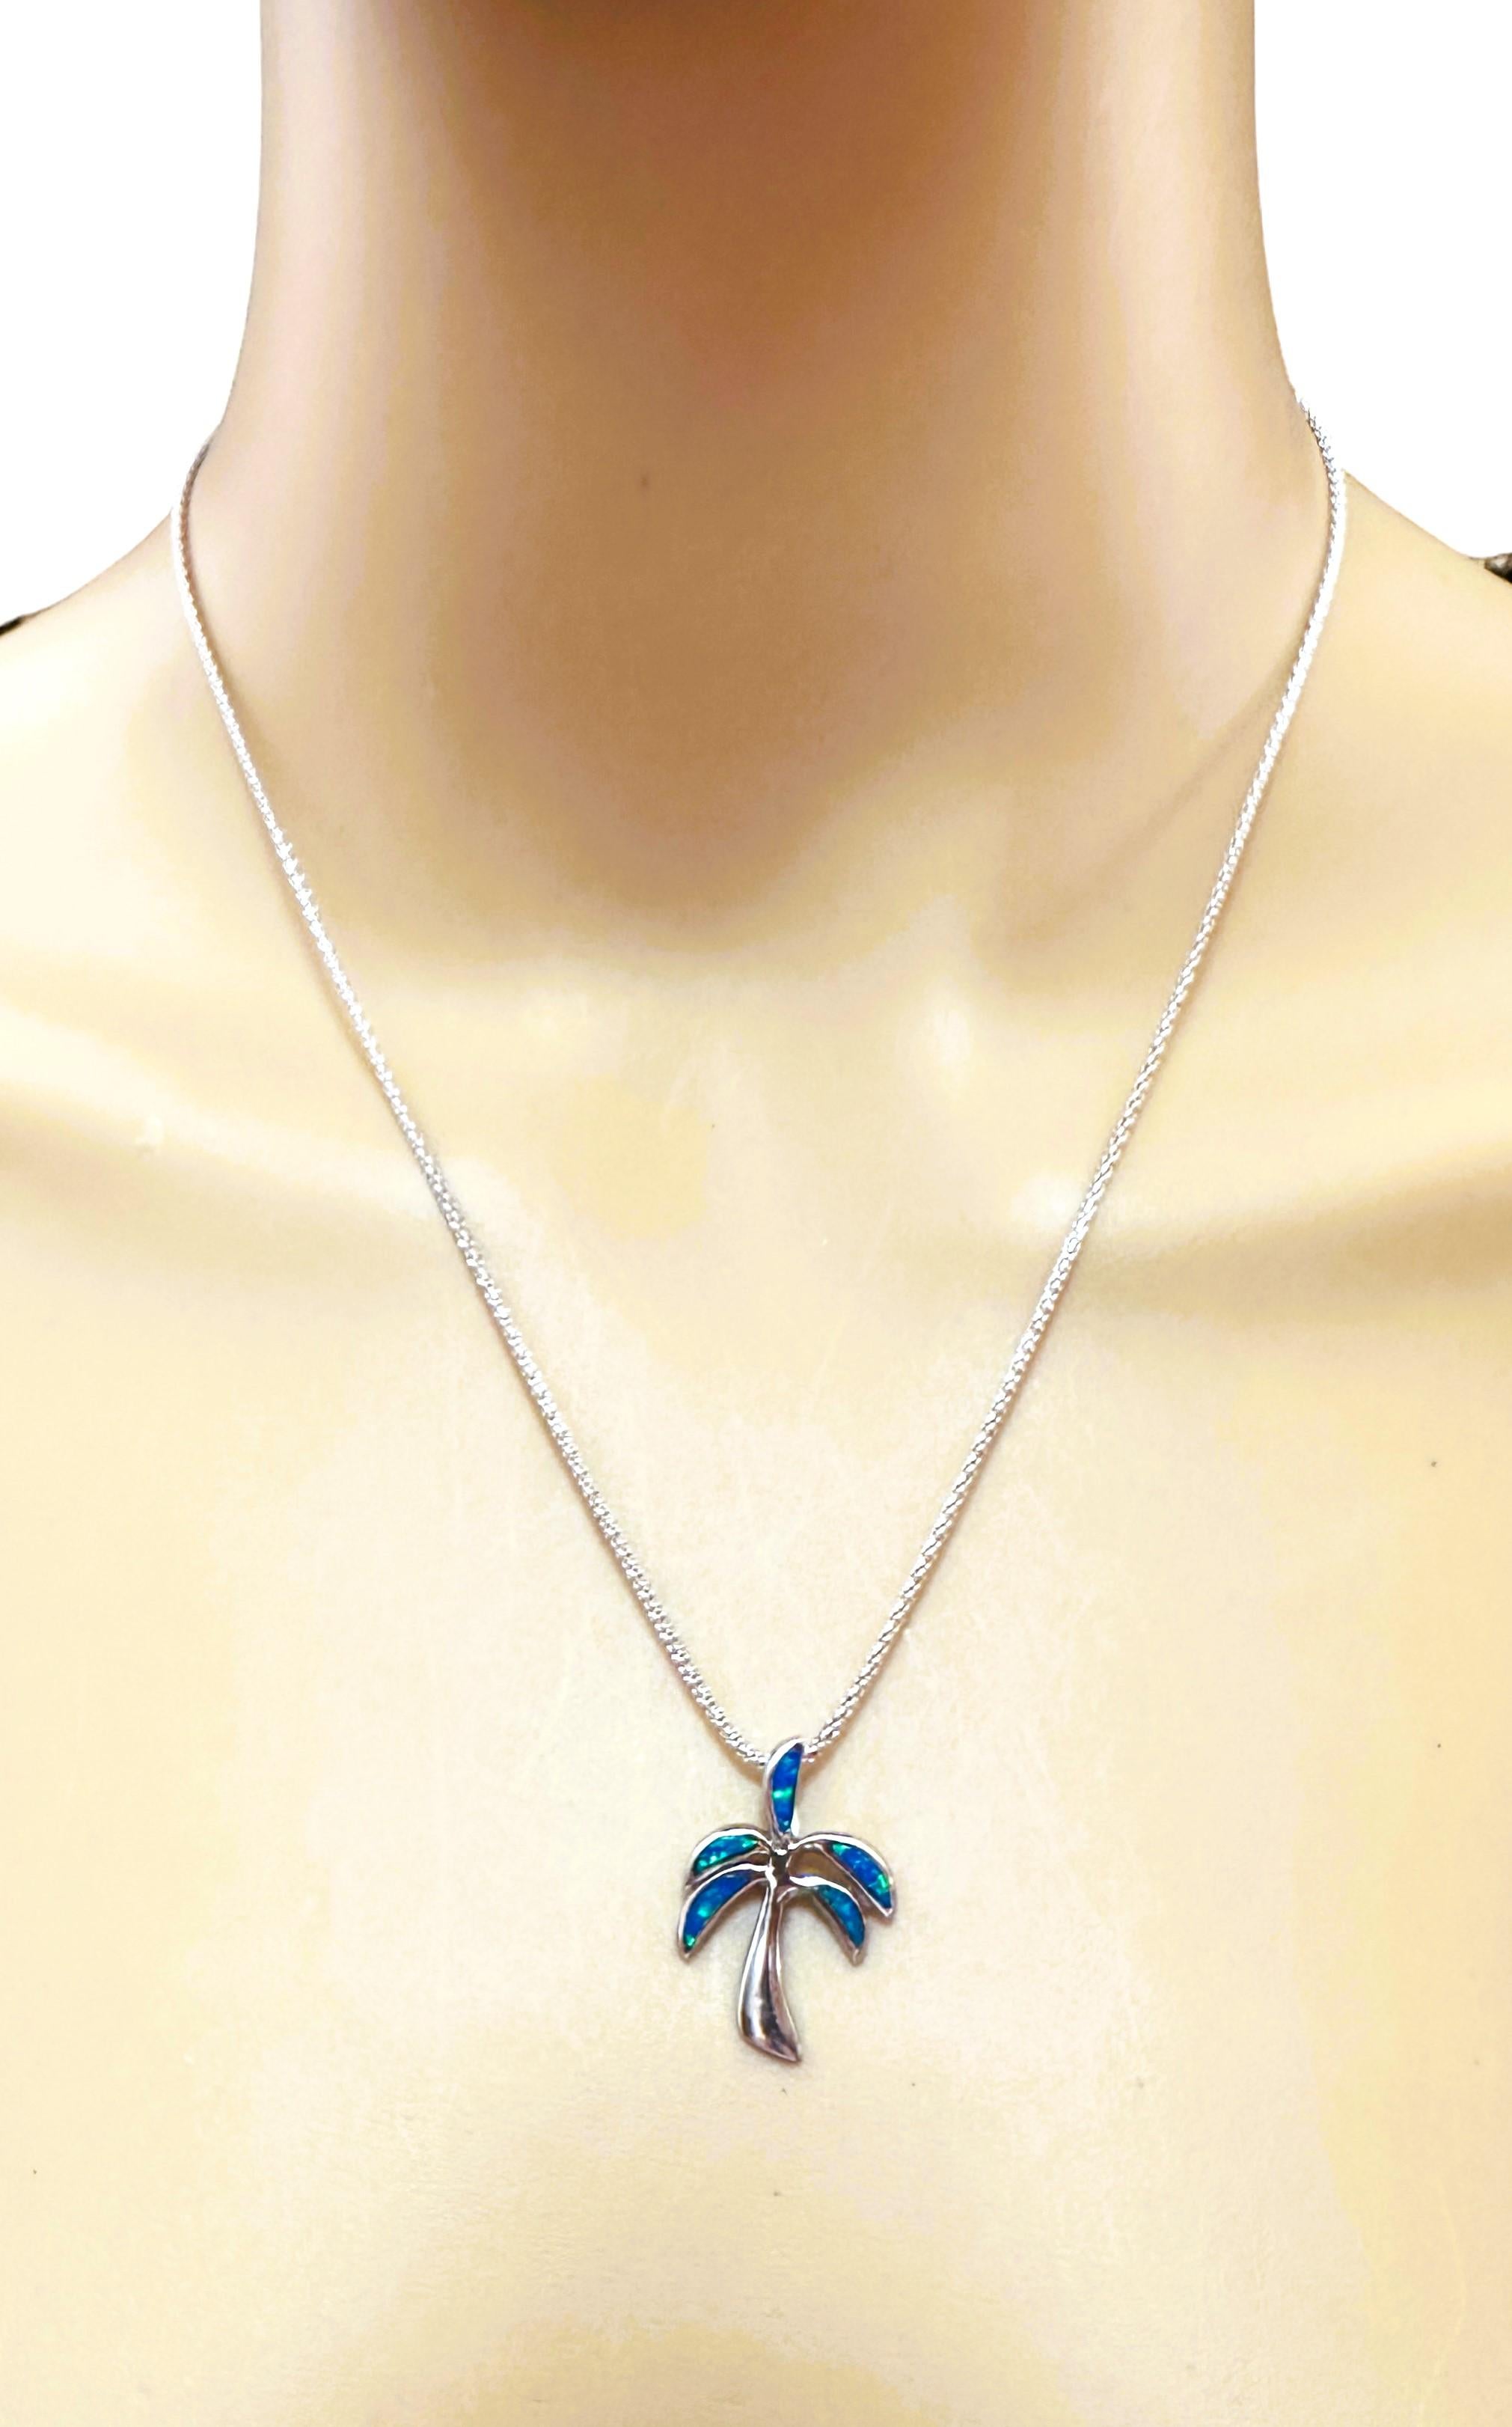 This is just a great pendant.  Makes you think of the summertime and the beach.  This necklace is pre-owned but in beautiful condition.  The Sterling Silver Chain is 18